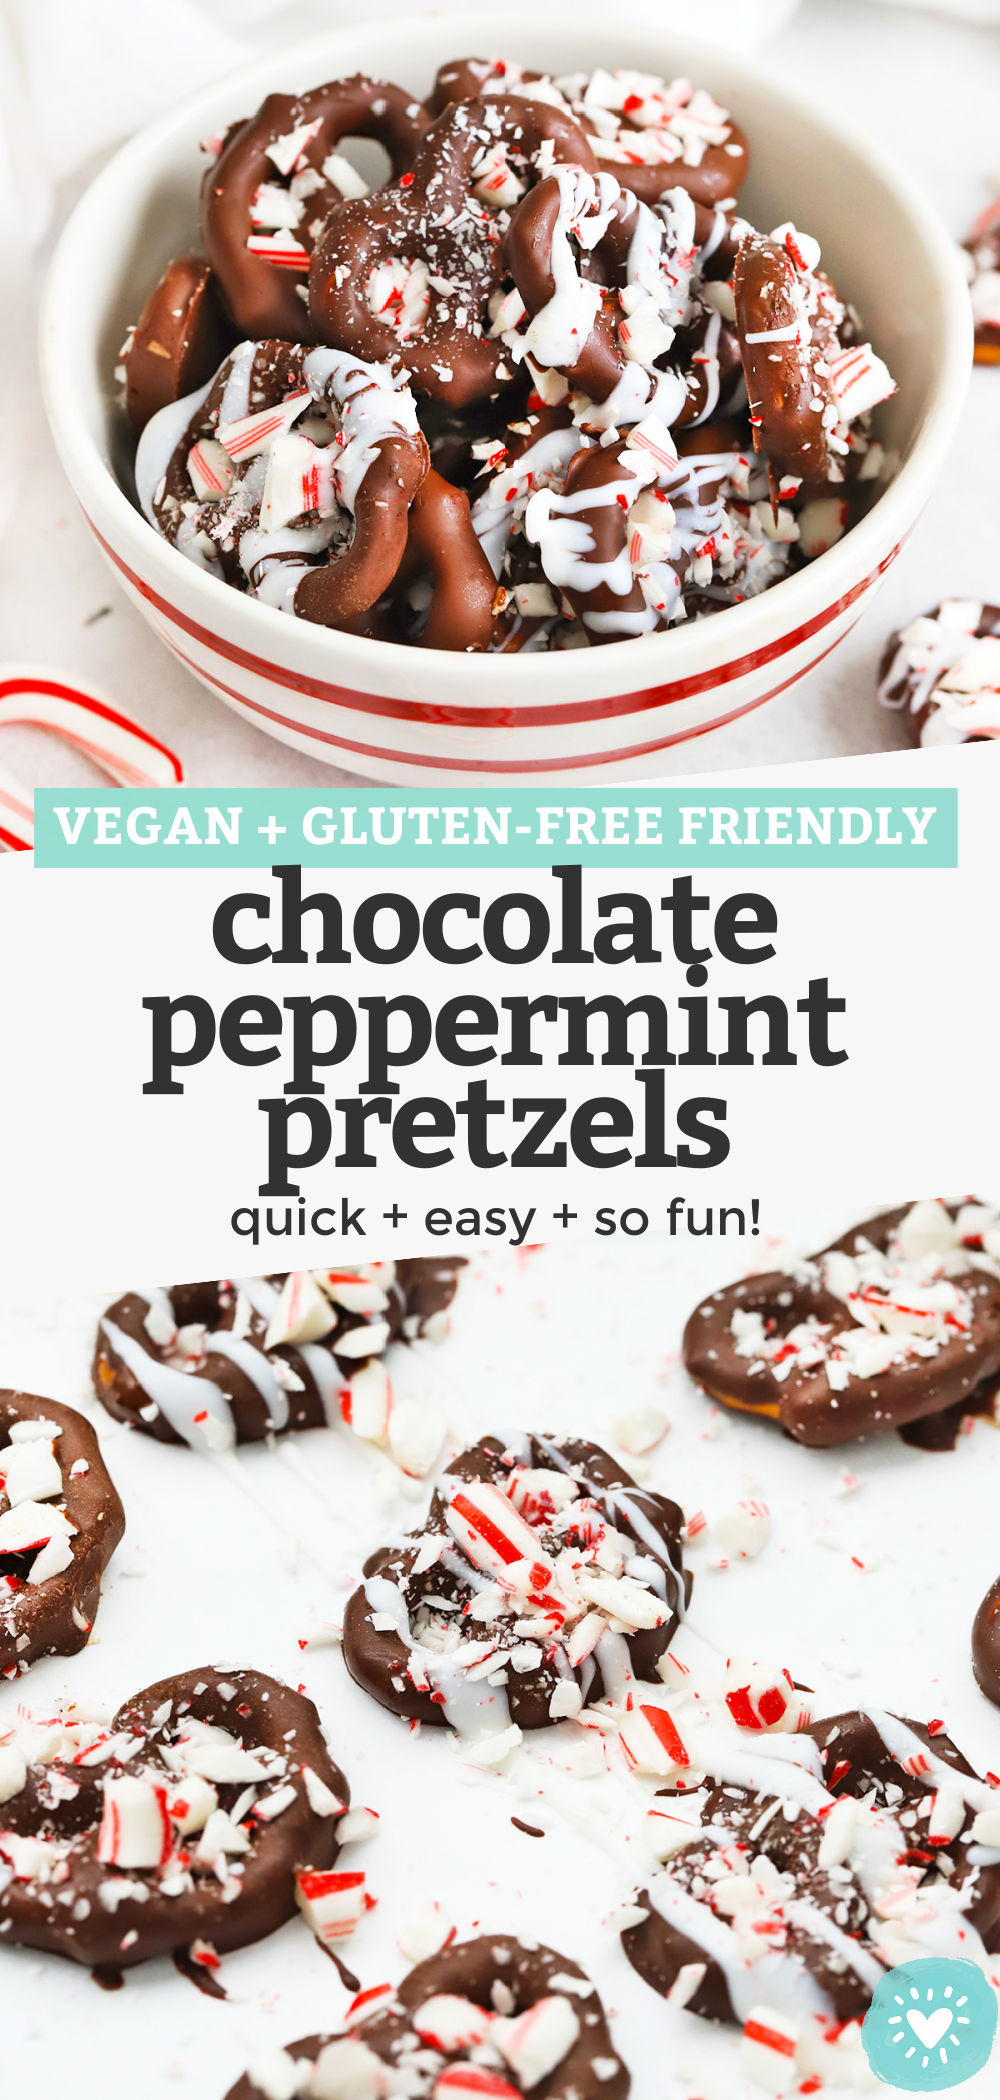 Gluten-Free Chocolate Peppermint Pretzels - These chocolate peppermint dipped pretzels only require 3 ingredients and 20-30 minutes to make. The easiest holiday treat around! (Gluten-Free + Vegan-Friendly) // Vegan Chocolate Peppermint Pretzels // Edible Holiday Gift // Food Gift Idea // Holiday Treat // Candy Cane Pretzels #glutenfree #dairyfree #vegan #dessert #chocolate #pretzels